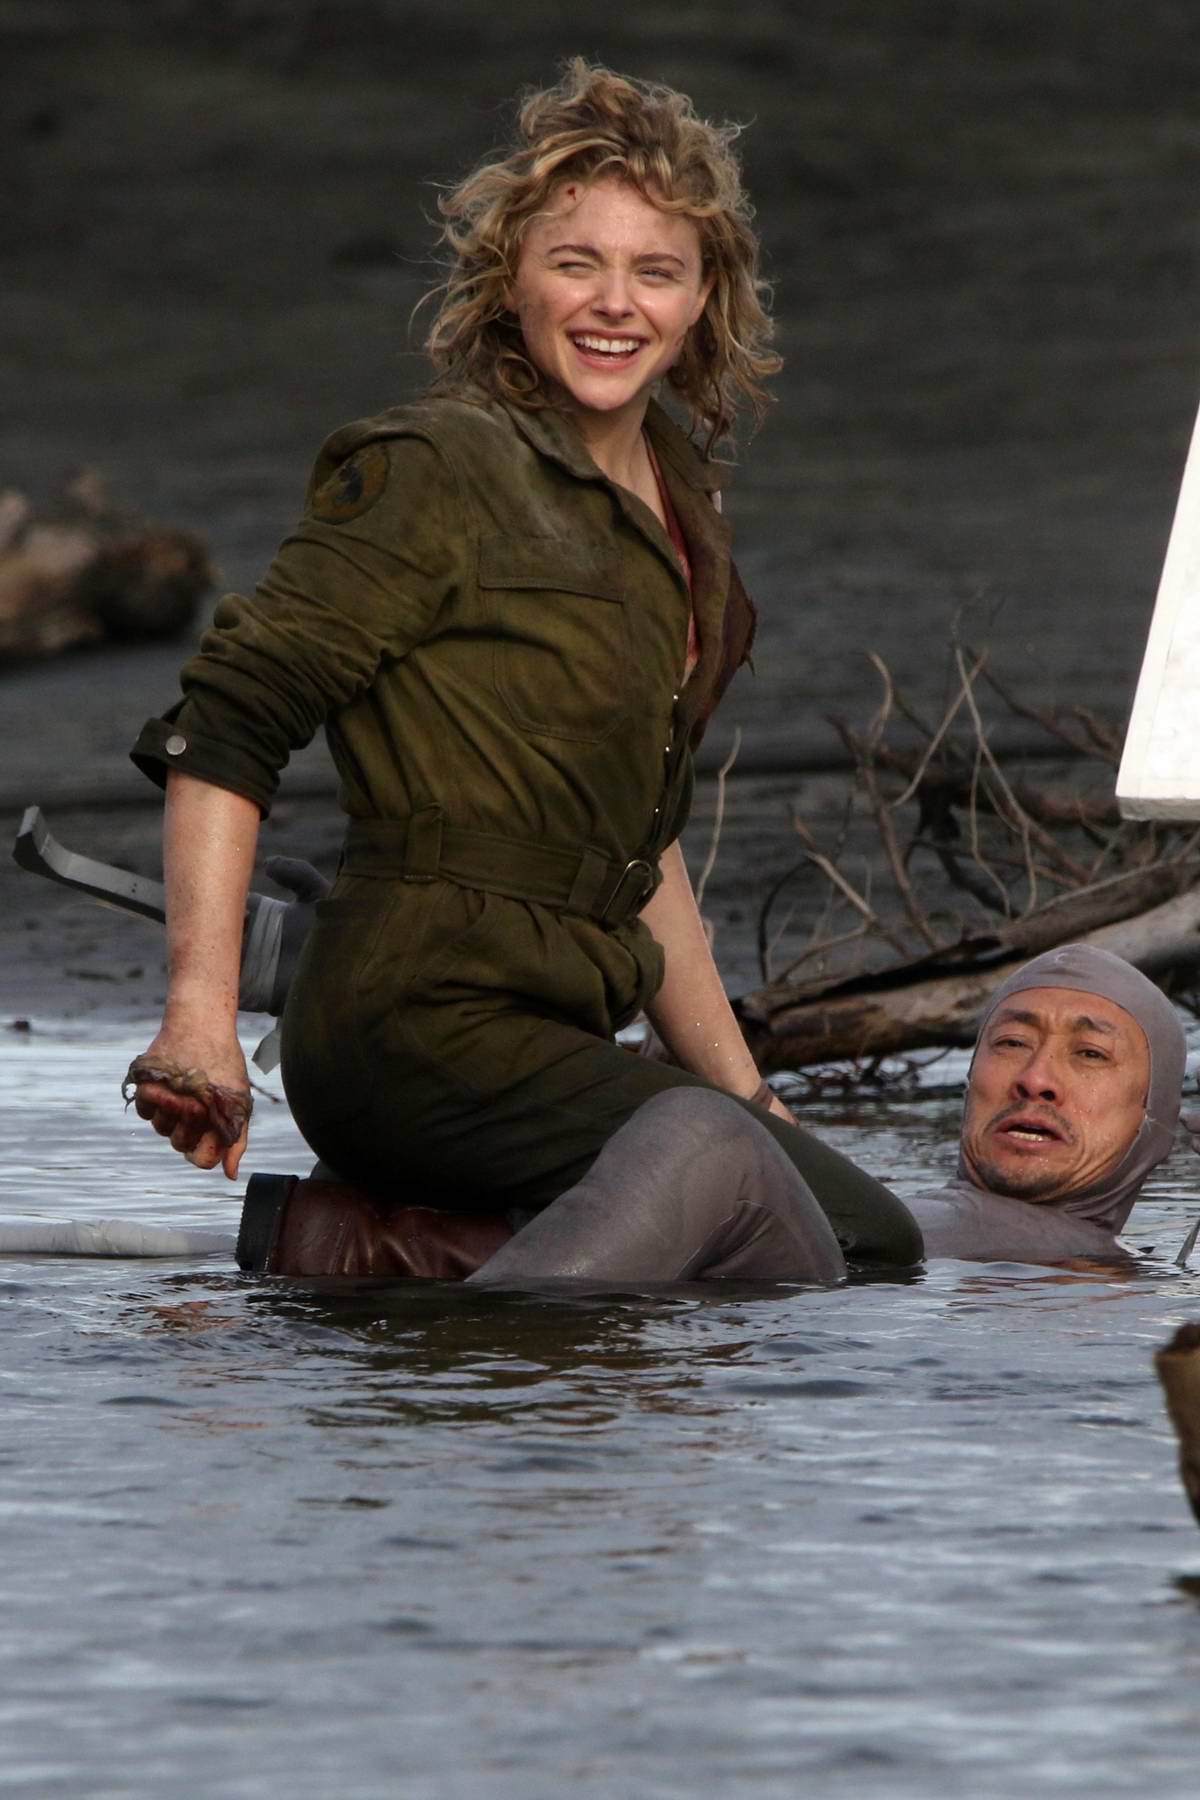 chloe grace moretz spotted filming an action scene for her upcoming  action-horror movie 'shadow in the cloud' in new zealand-100619_12